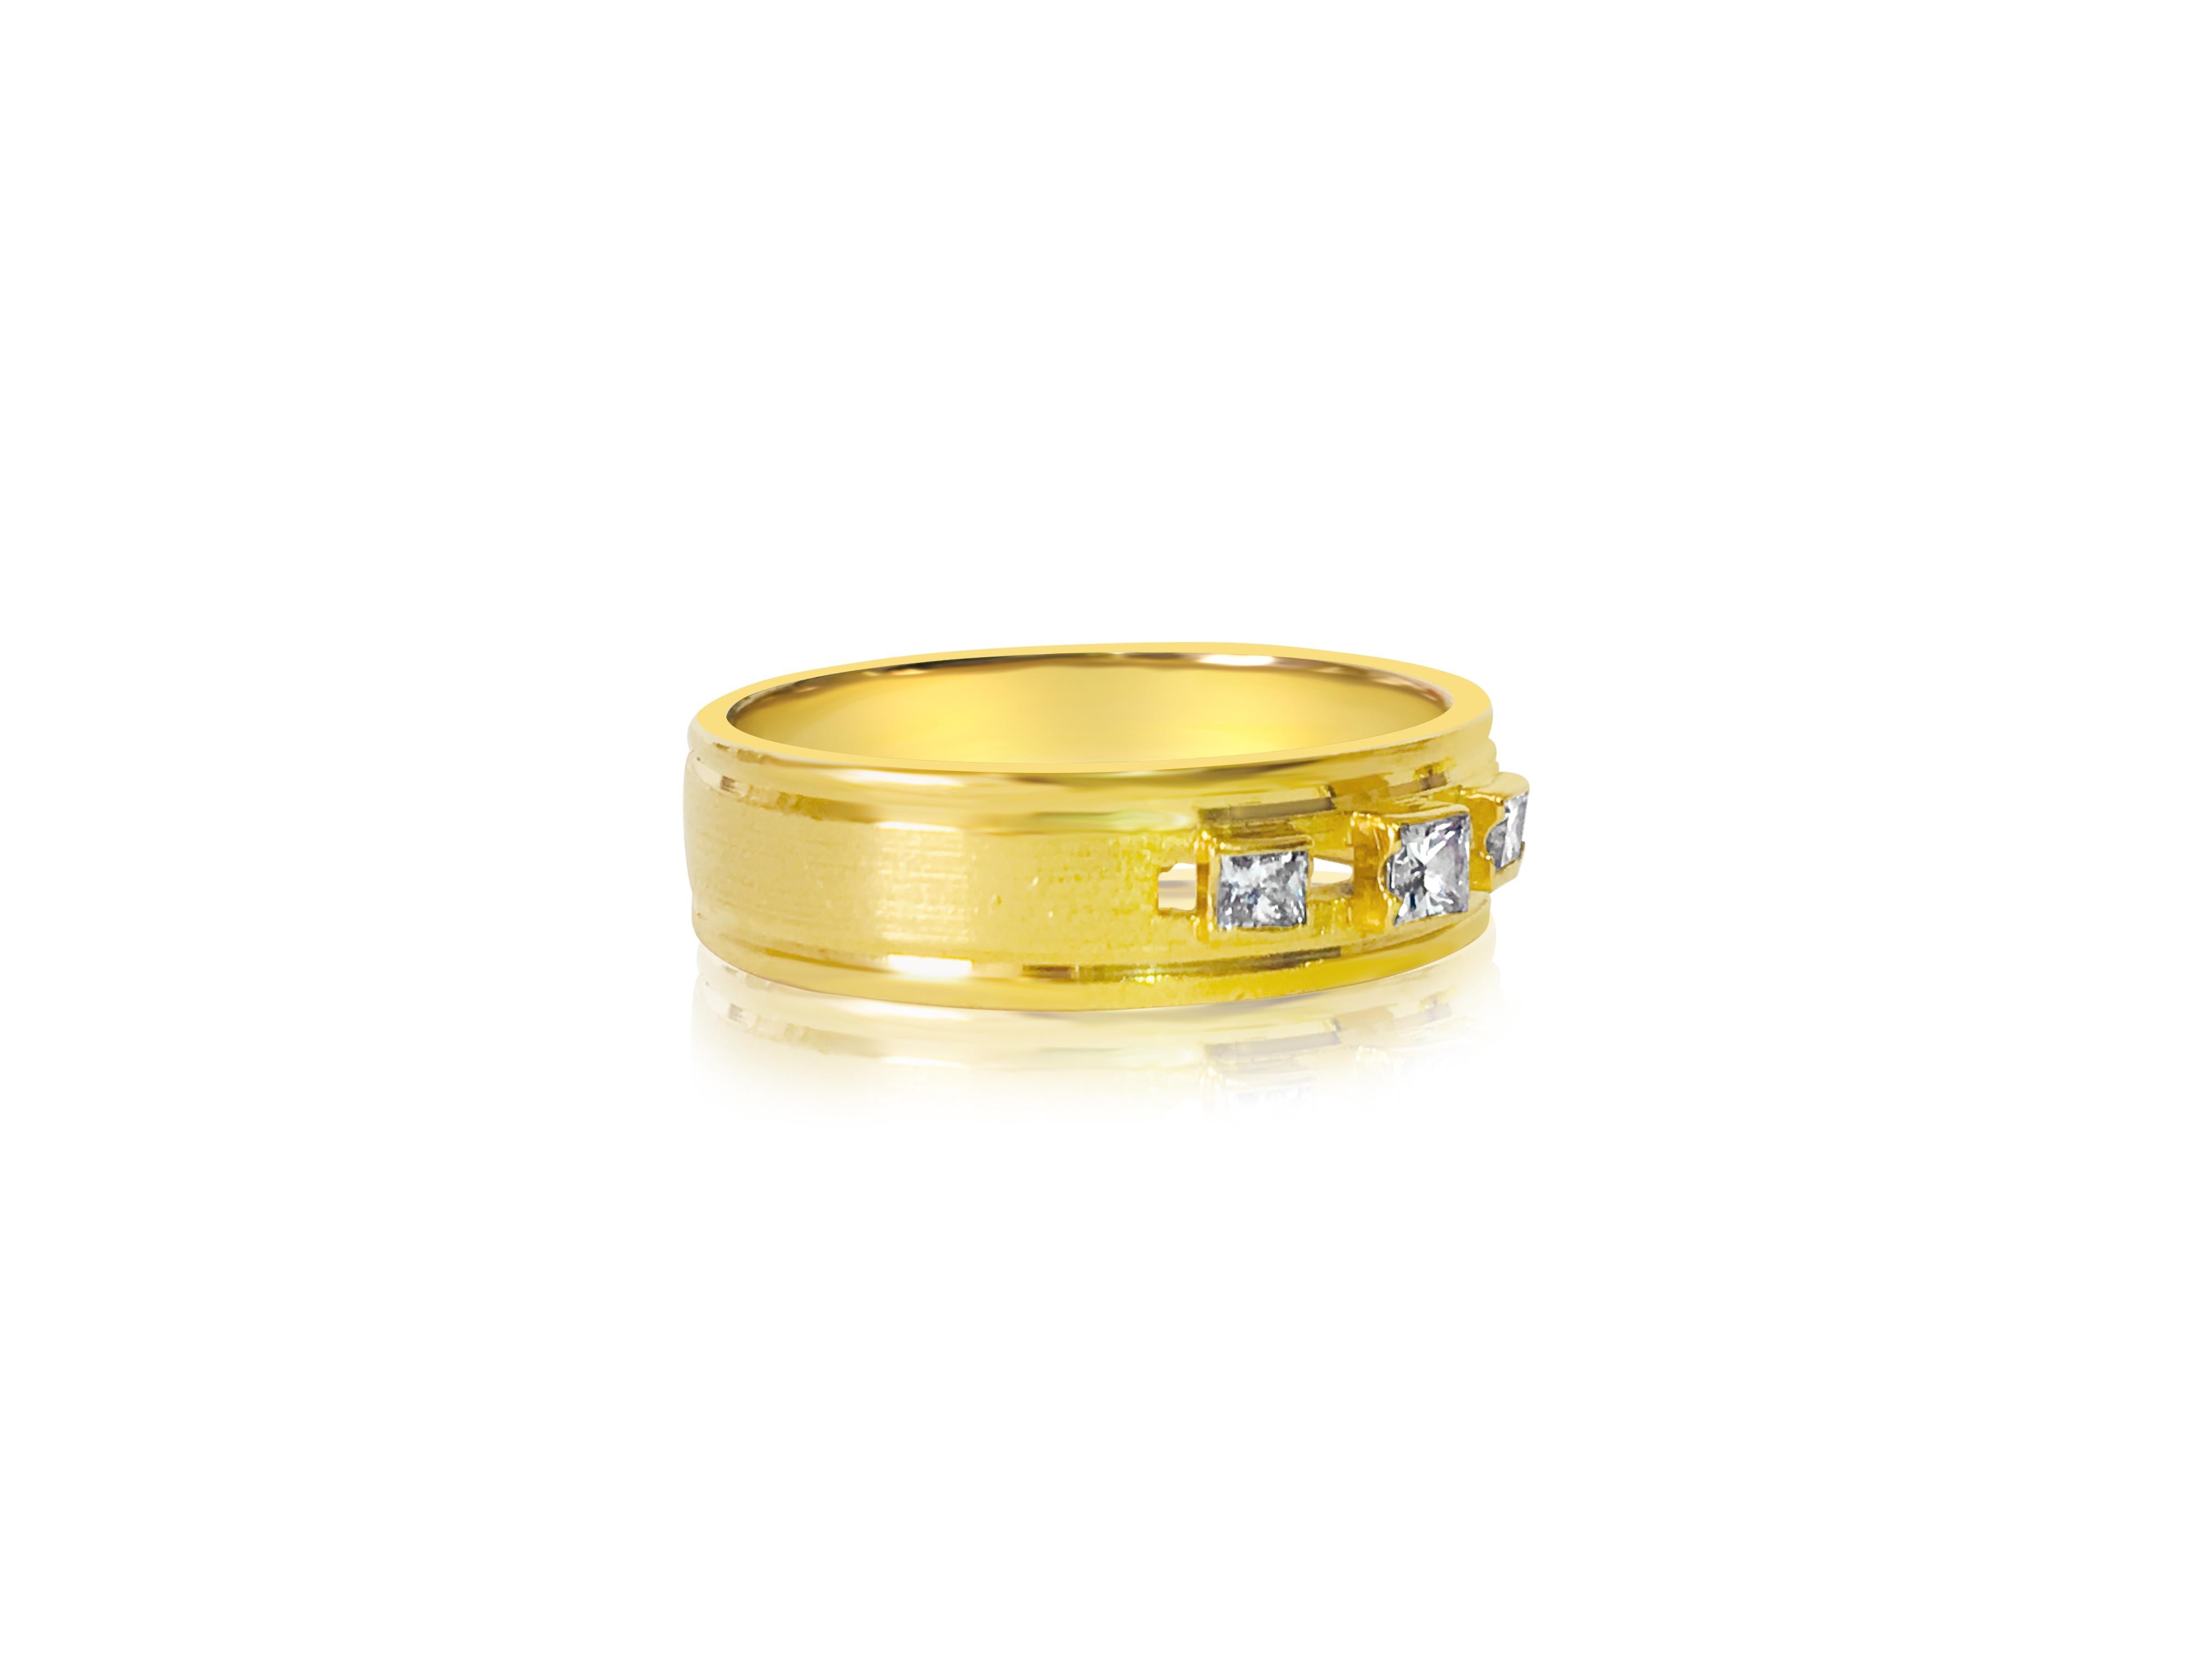 In lustrous 18K yellow gold, this vintage ring is adorned with 0.55 carats of princess-cut diamonds, boasting VS clarity and G color for stunning brilliance. The clean, elegant design exudes timeless charm, making it a perfect gift for a variety of